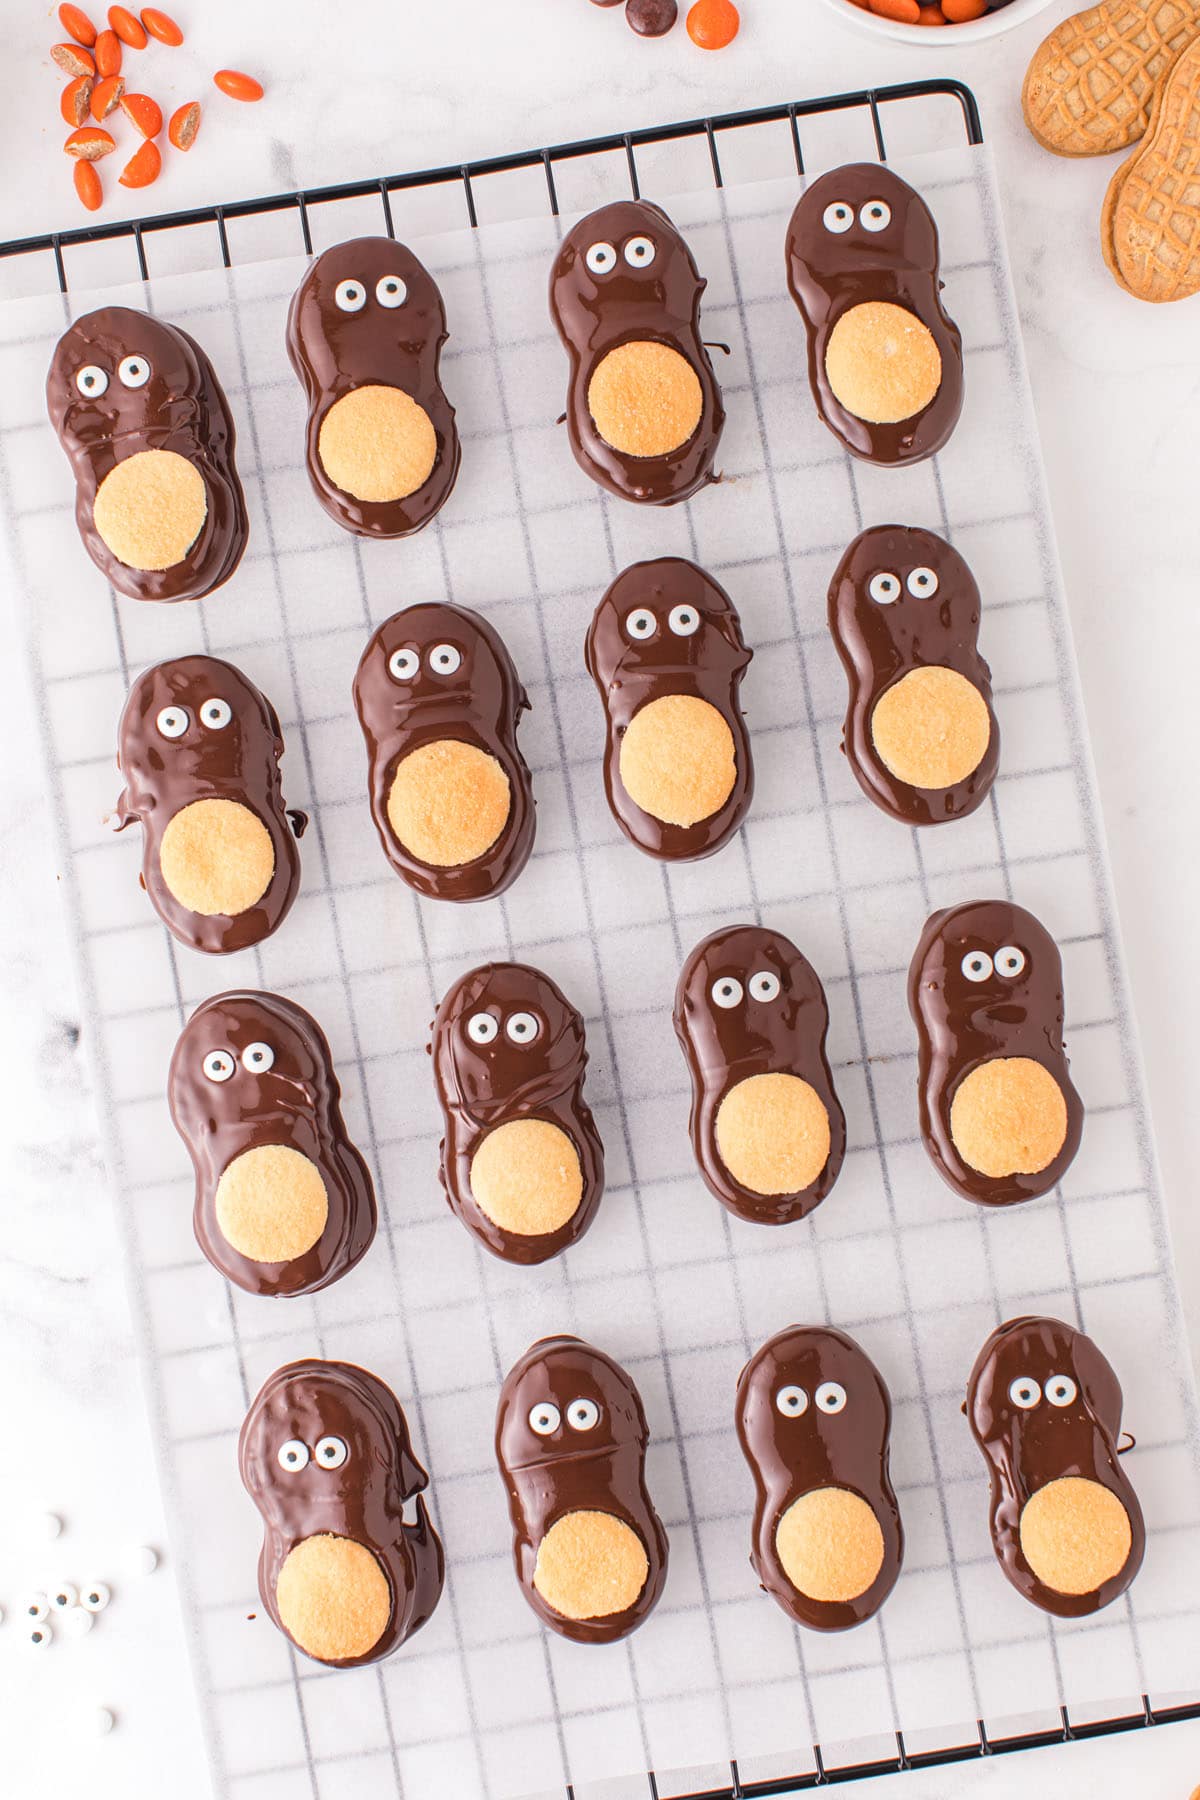 Add two candy eyes to the top half of each cookie